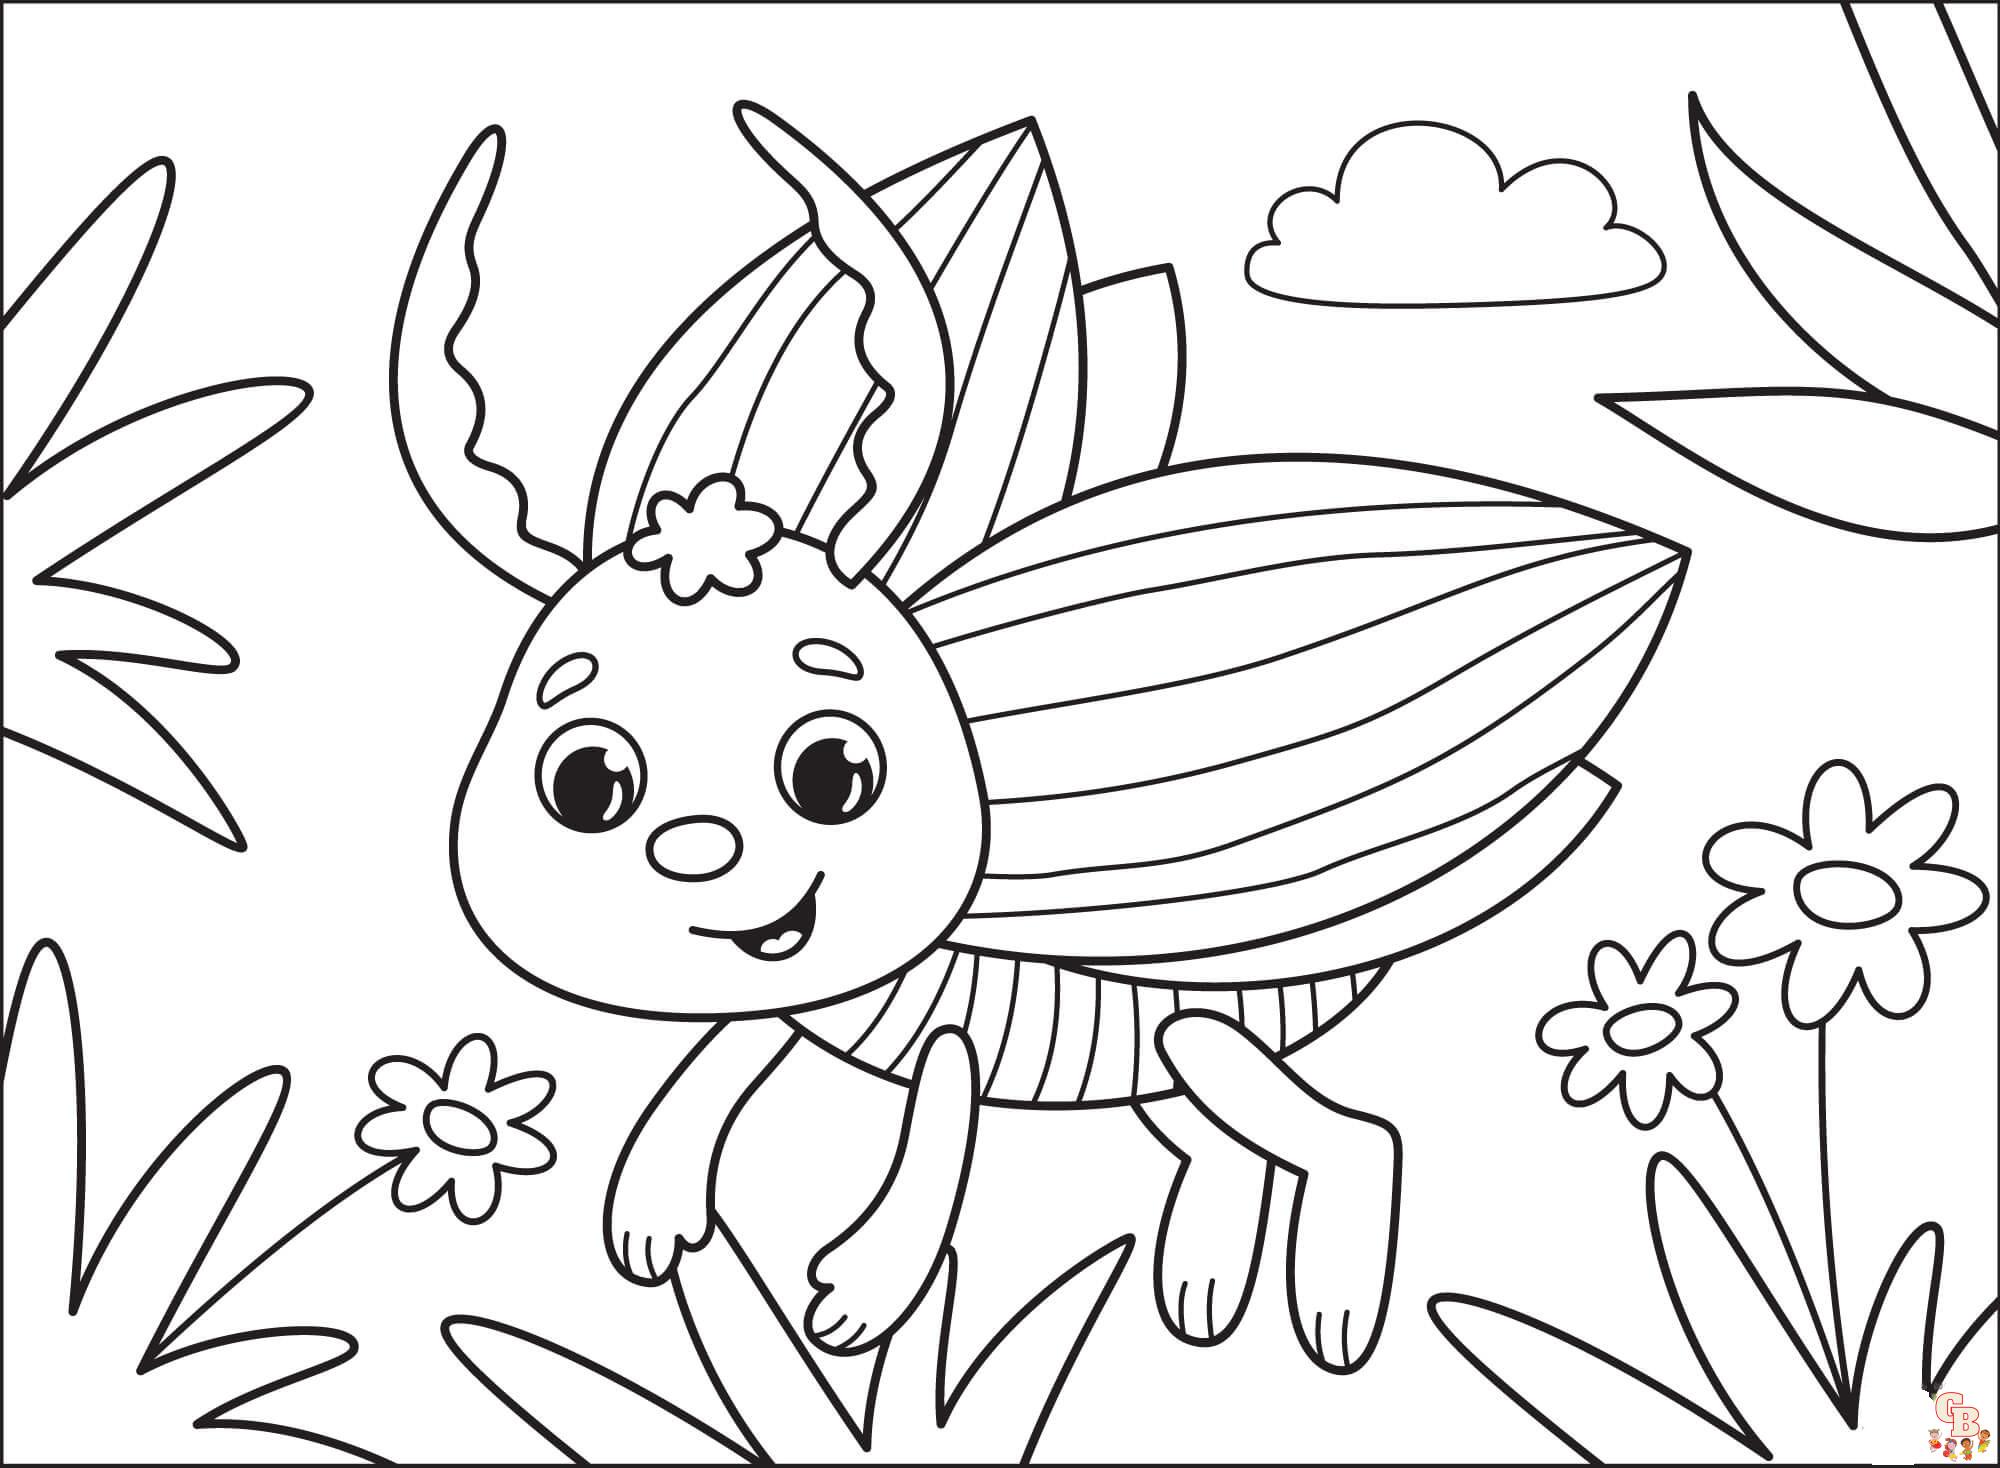 Printable and easy bugs coloring pages for kids